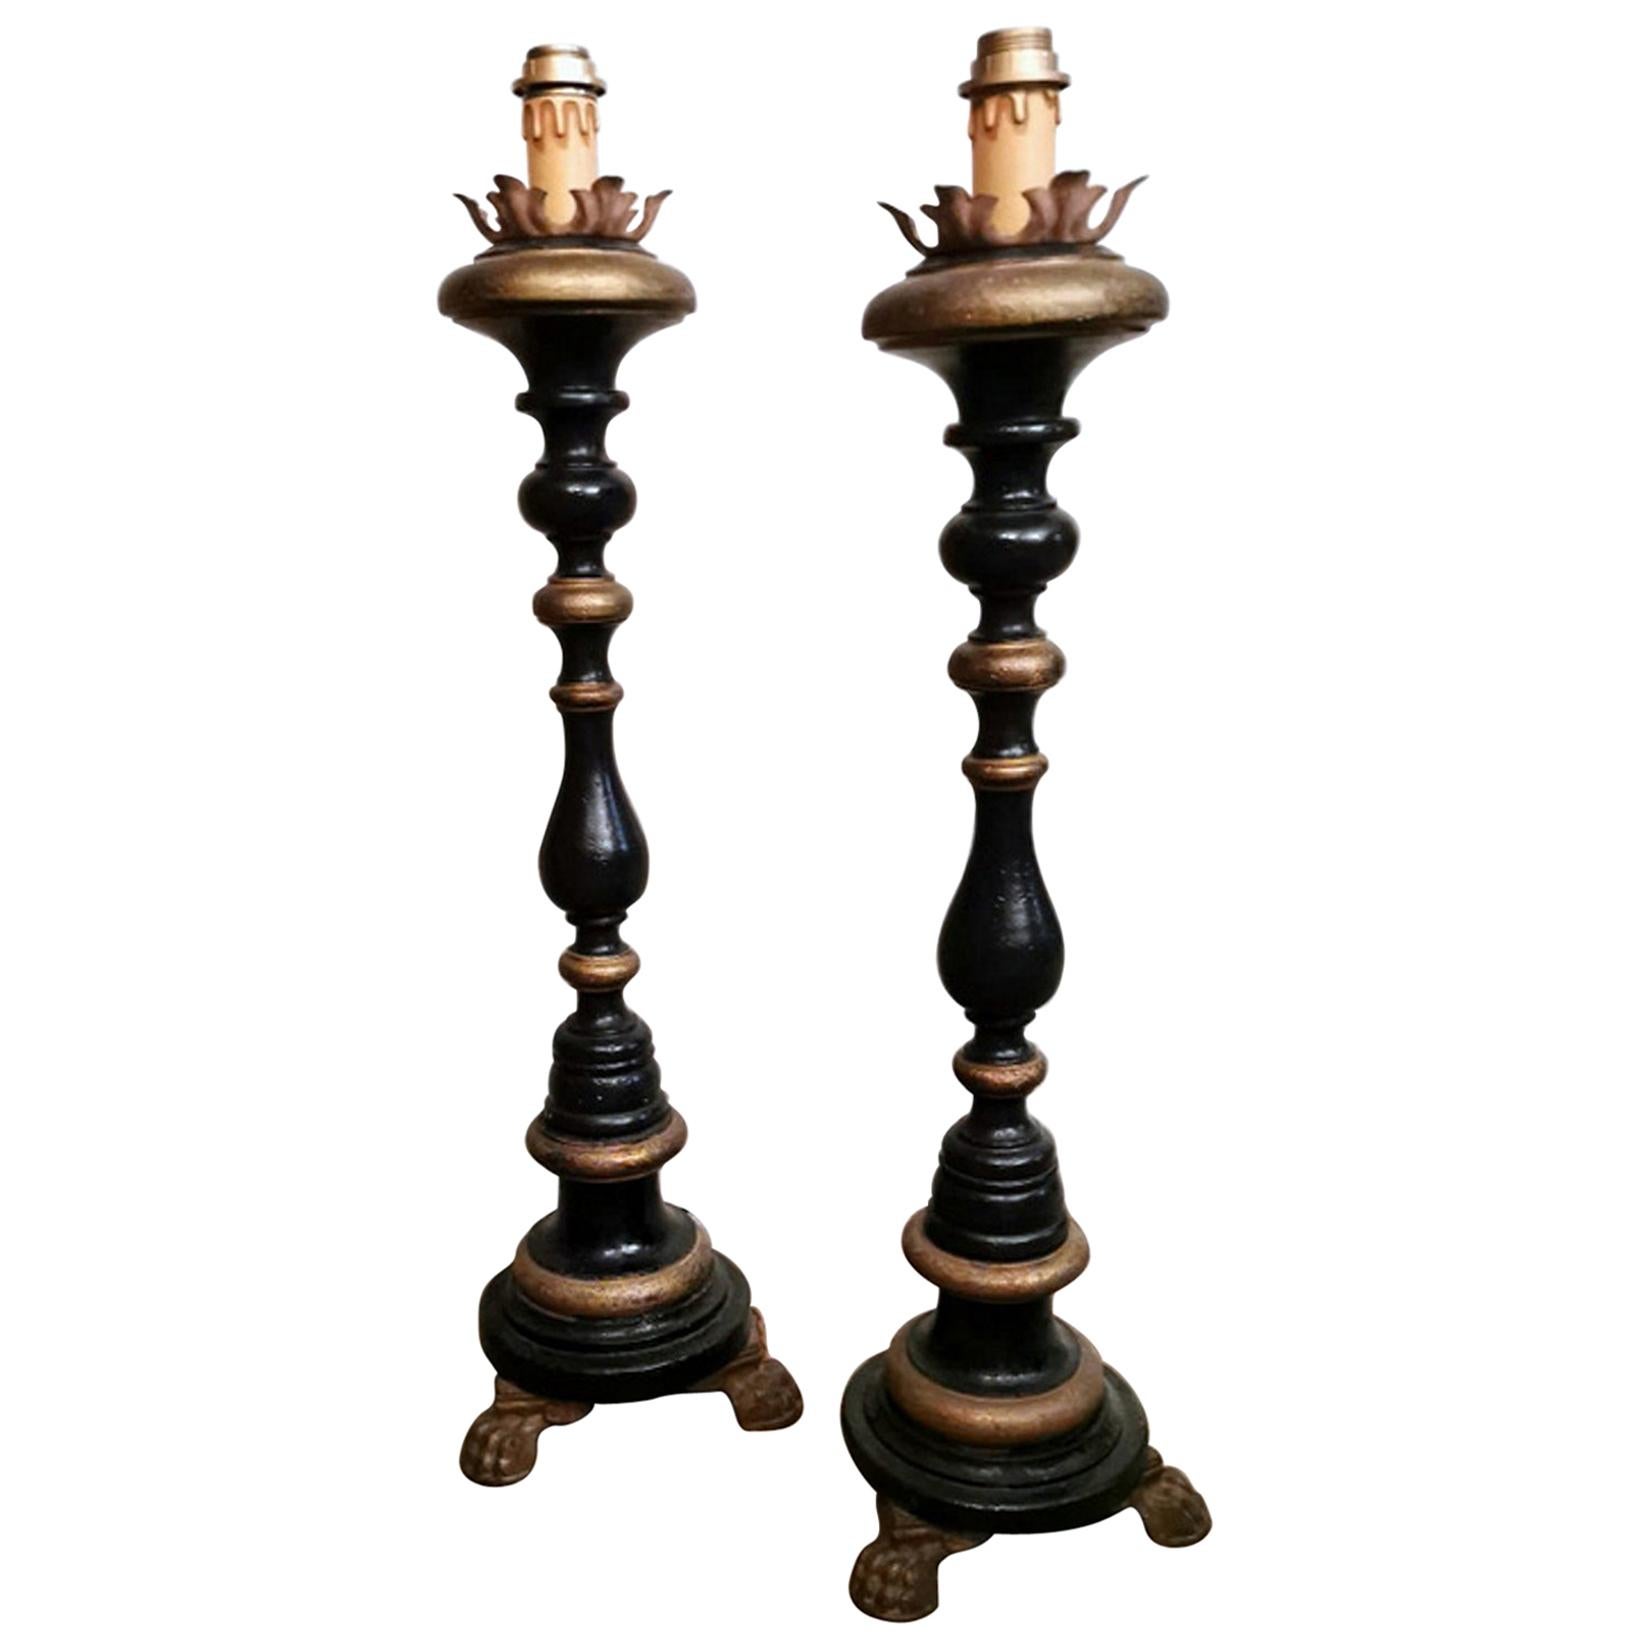 Italian Black Lacquered Wood and Burnished Gold Church Candlesticks